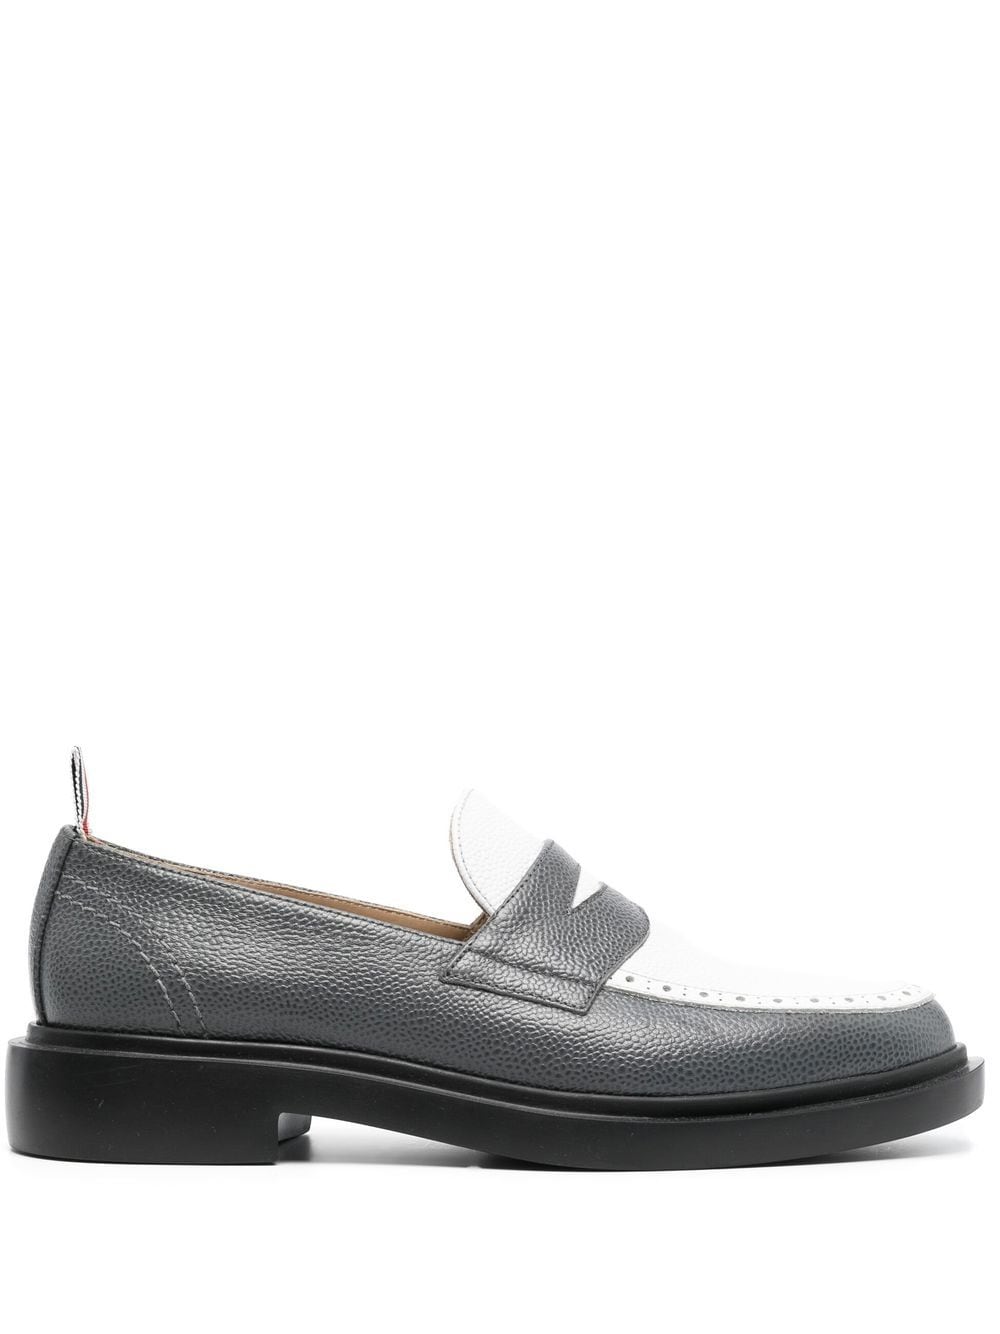 Thom Browne classic lightweight penny loafers - Grey von Thom Browne